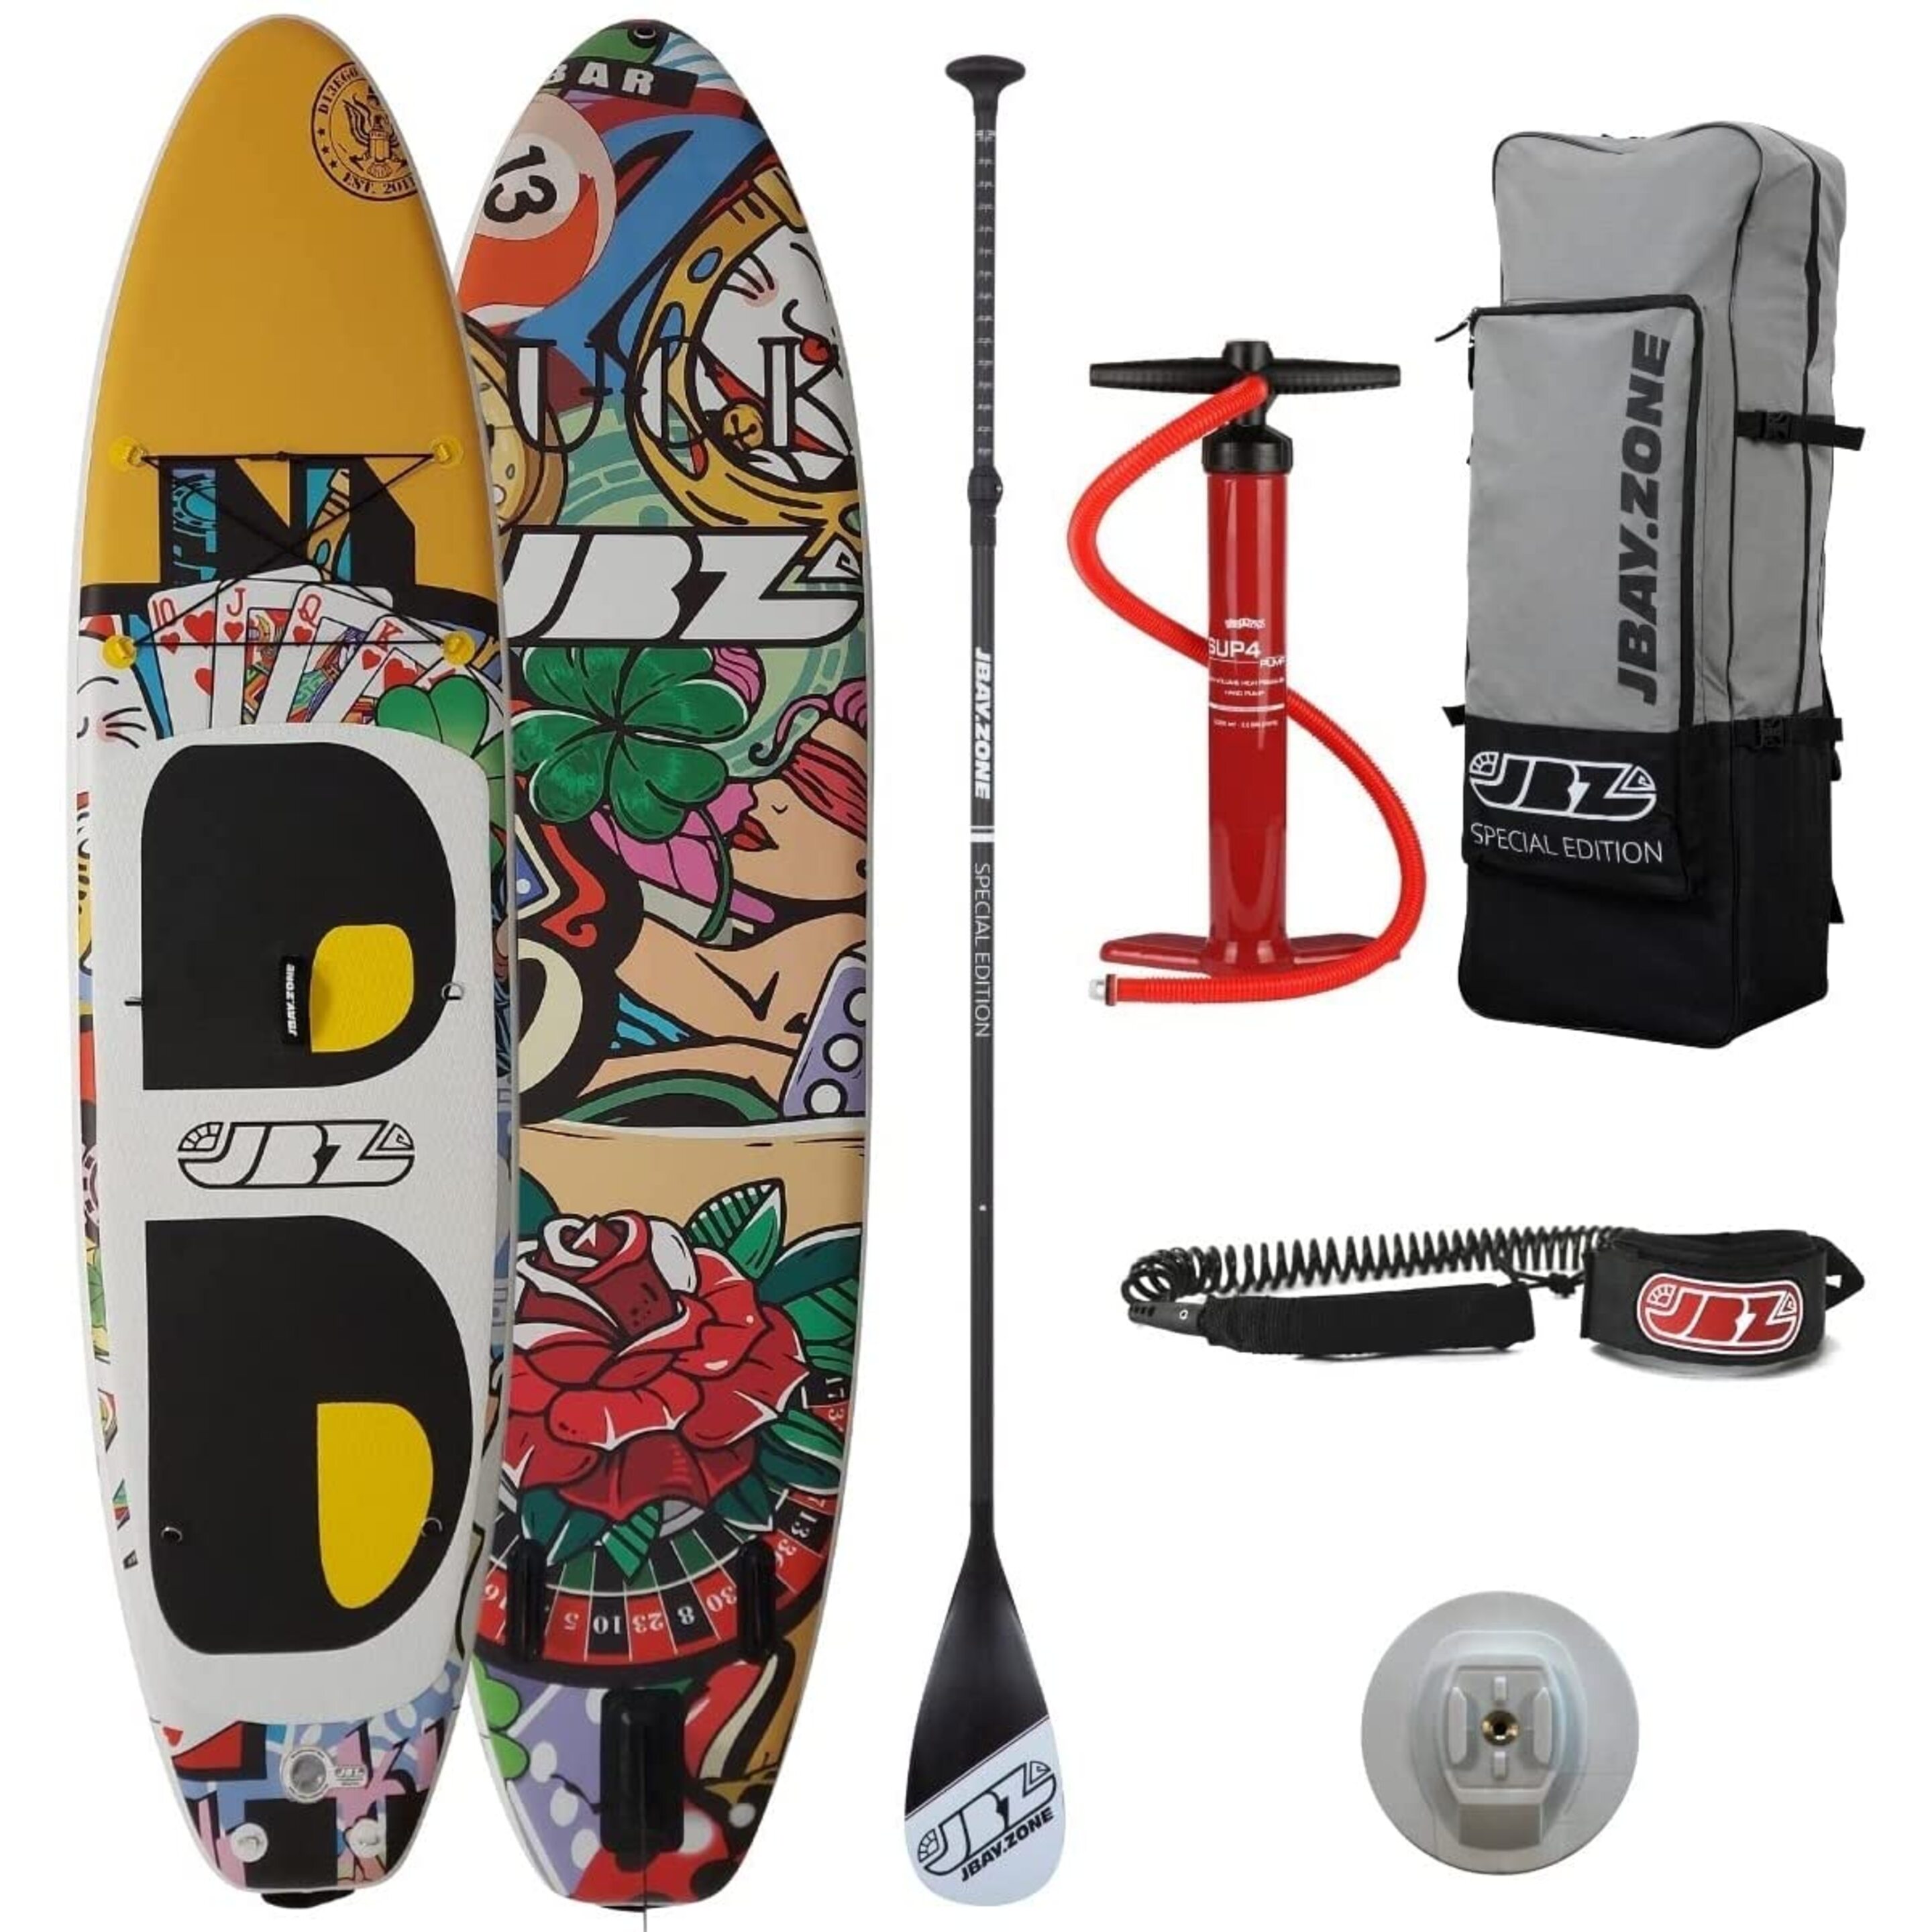 Tabla De Stand Up Paddle Surf Sup Hinchable Jbay.zone D13ego Luck Edition